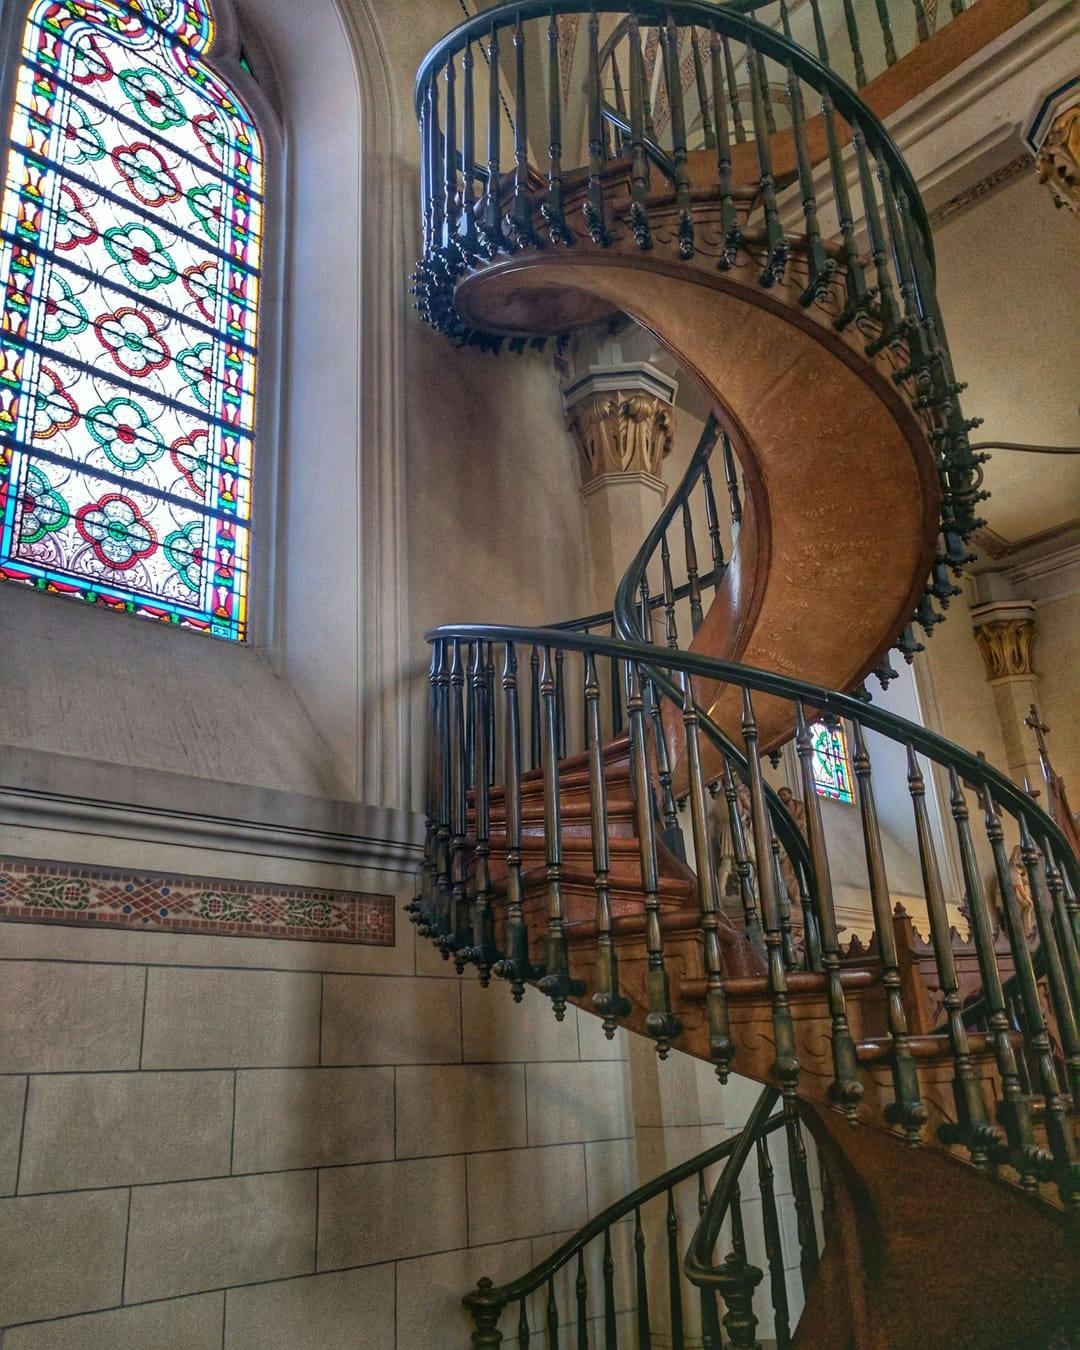 The "Miraculous Stair"